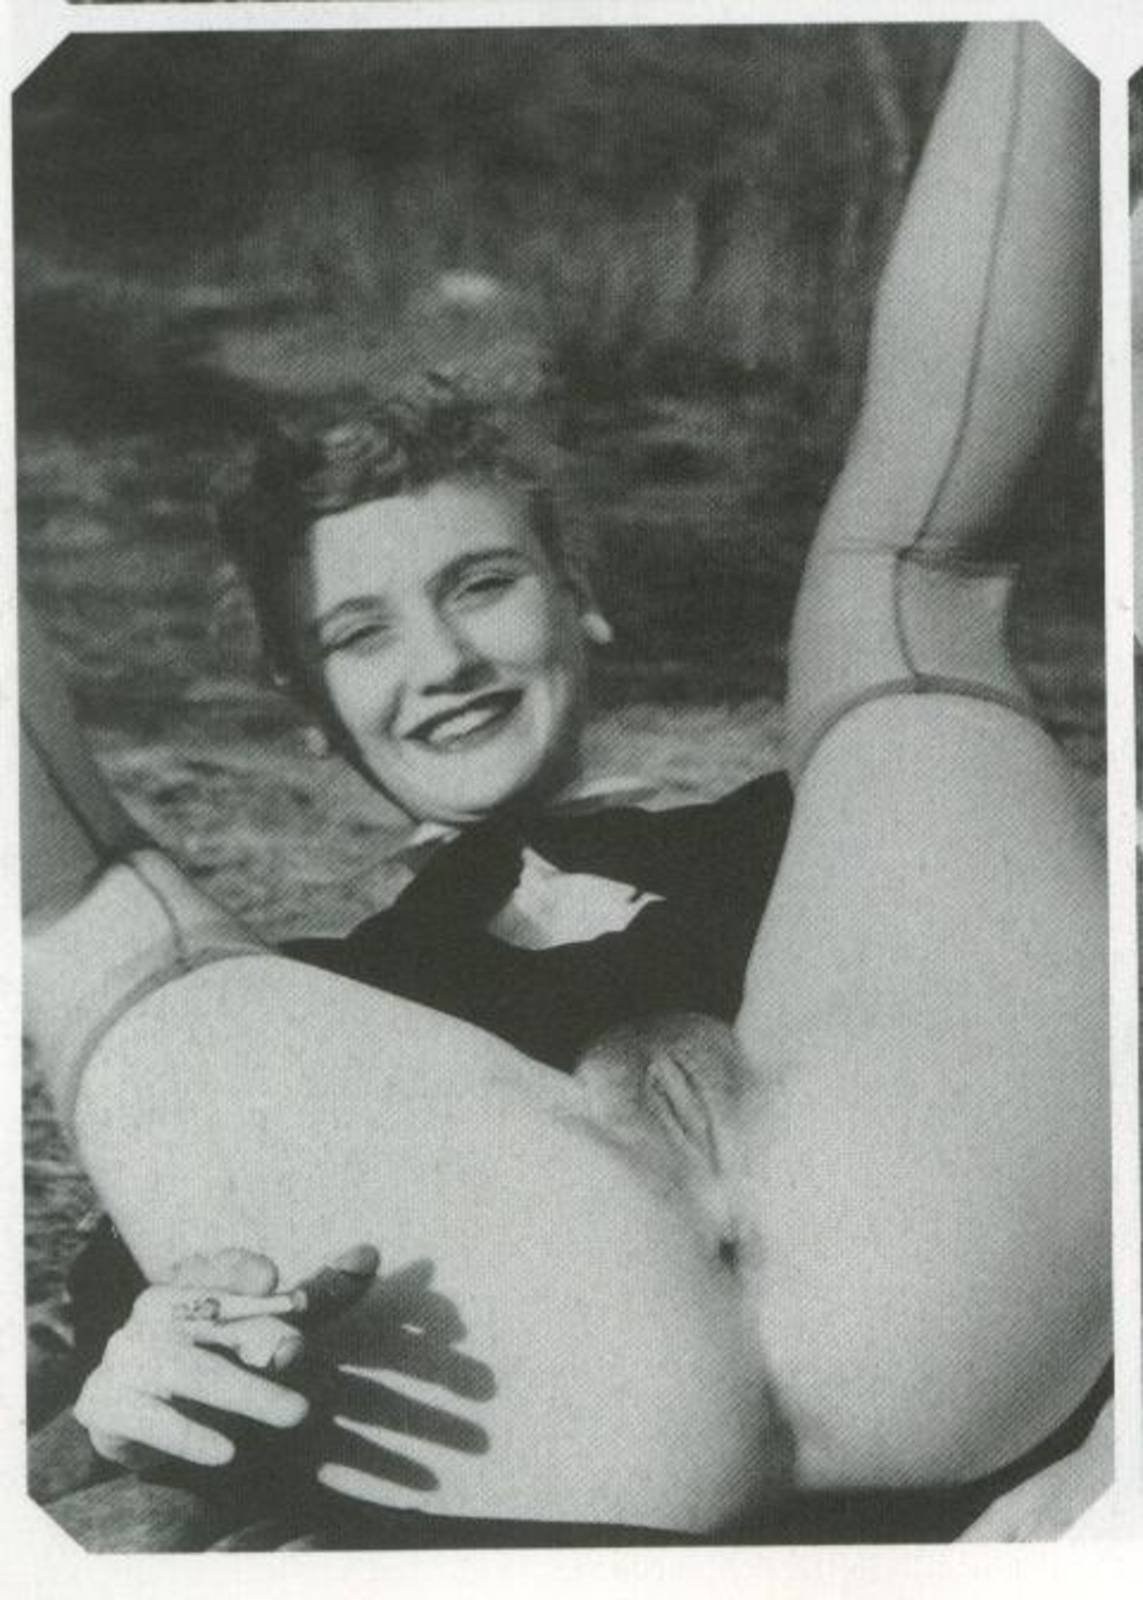 1940s Porn Germany - German Erotica from the 40s (40 photos) - porn photo